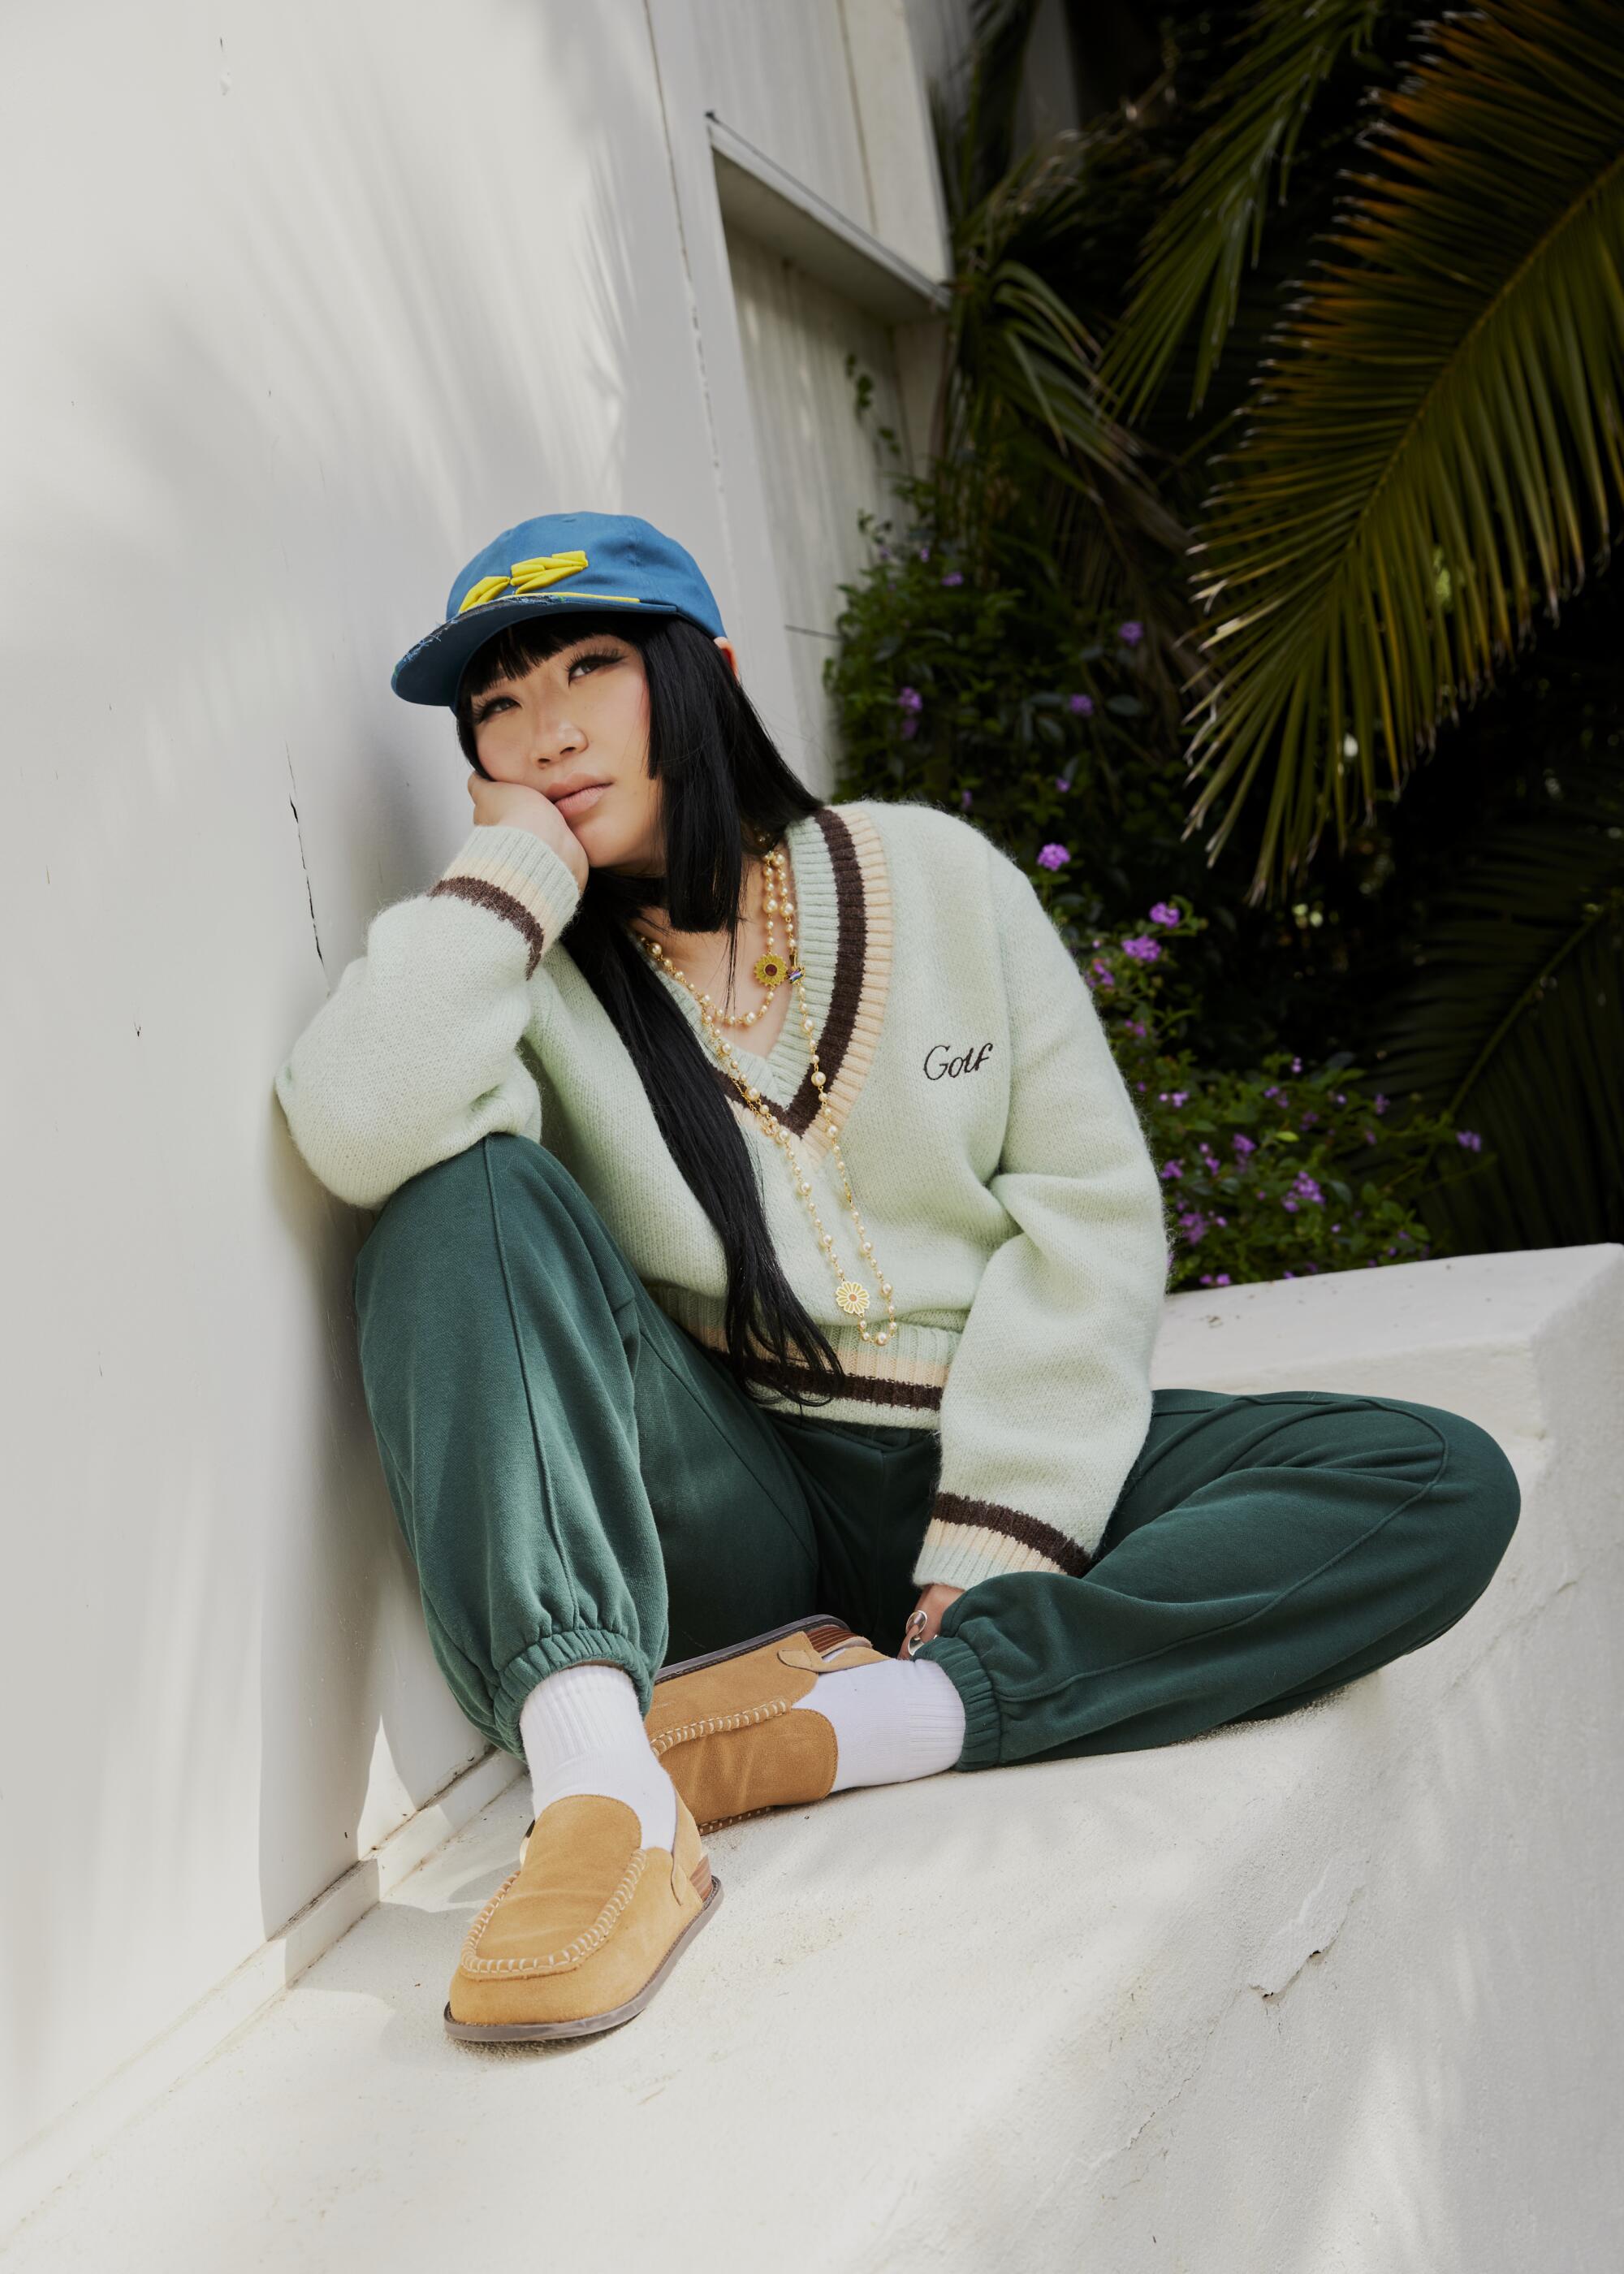 Stylist Jess Mori wears an all-green outfit and blue cap.